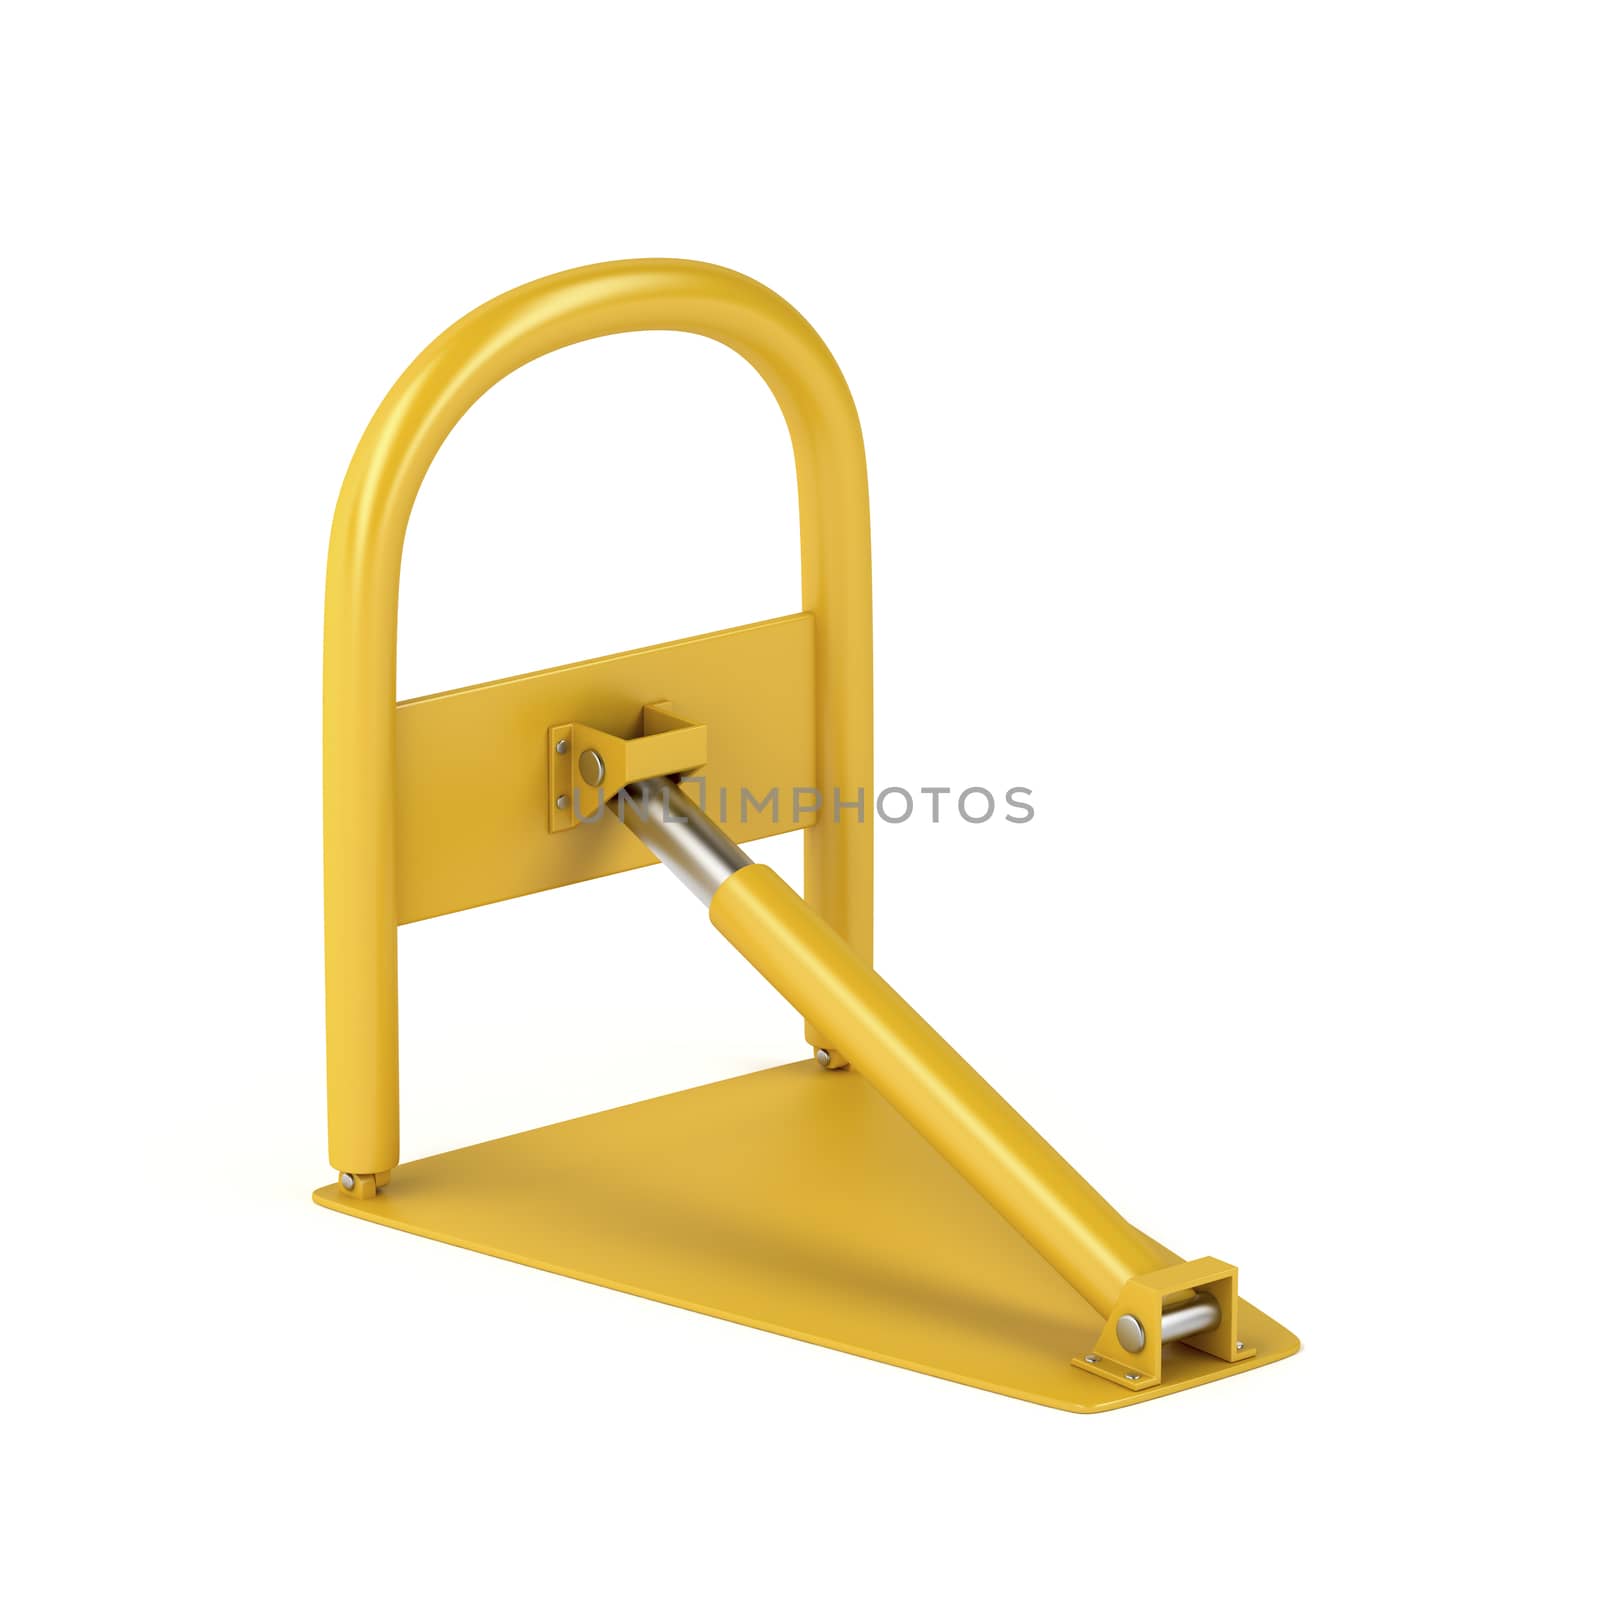 Yellow foldable parking barrier by magraphics